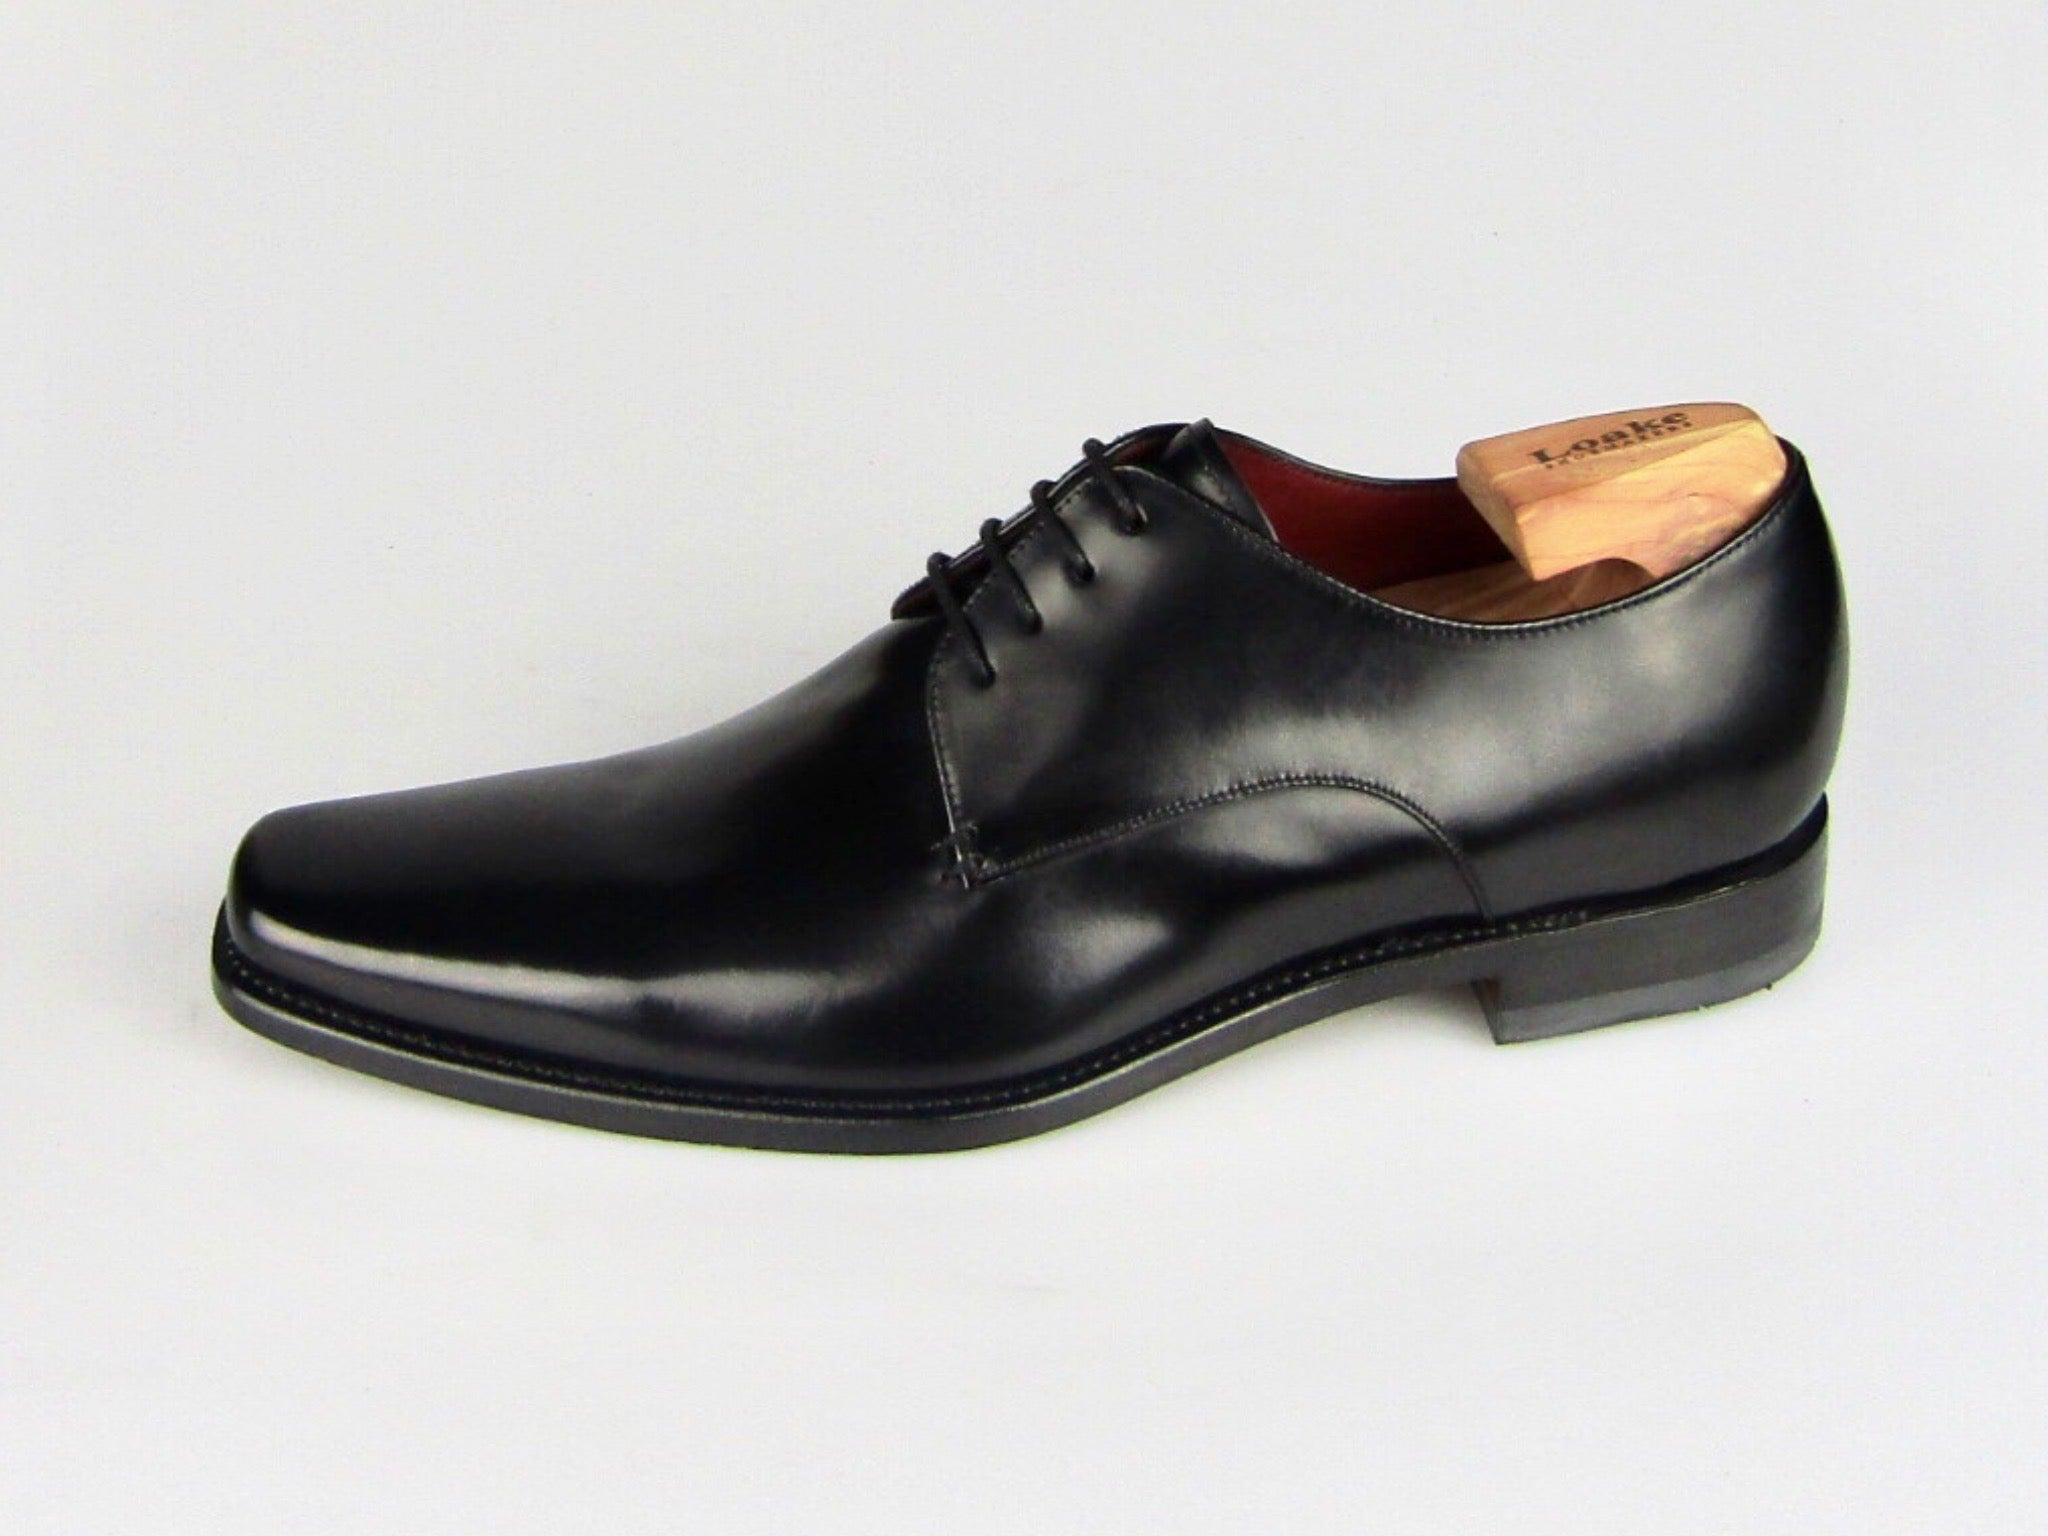 Loake Ridley – Discount Shoe Sales Limited